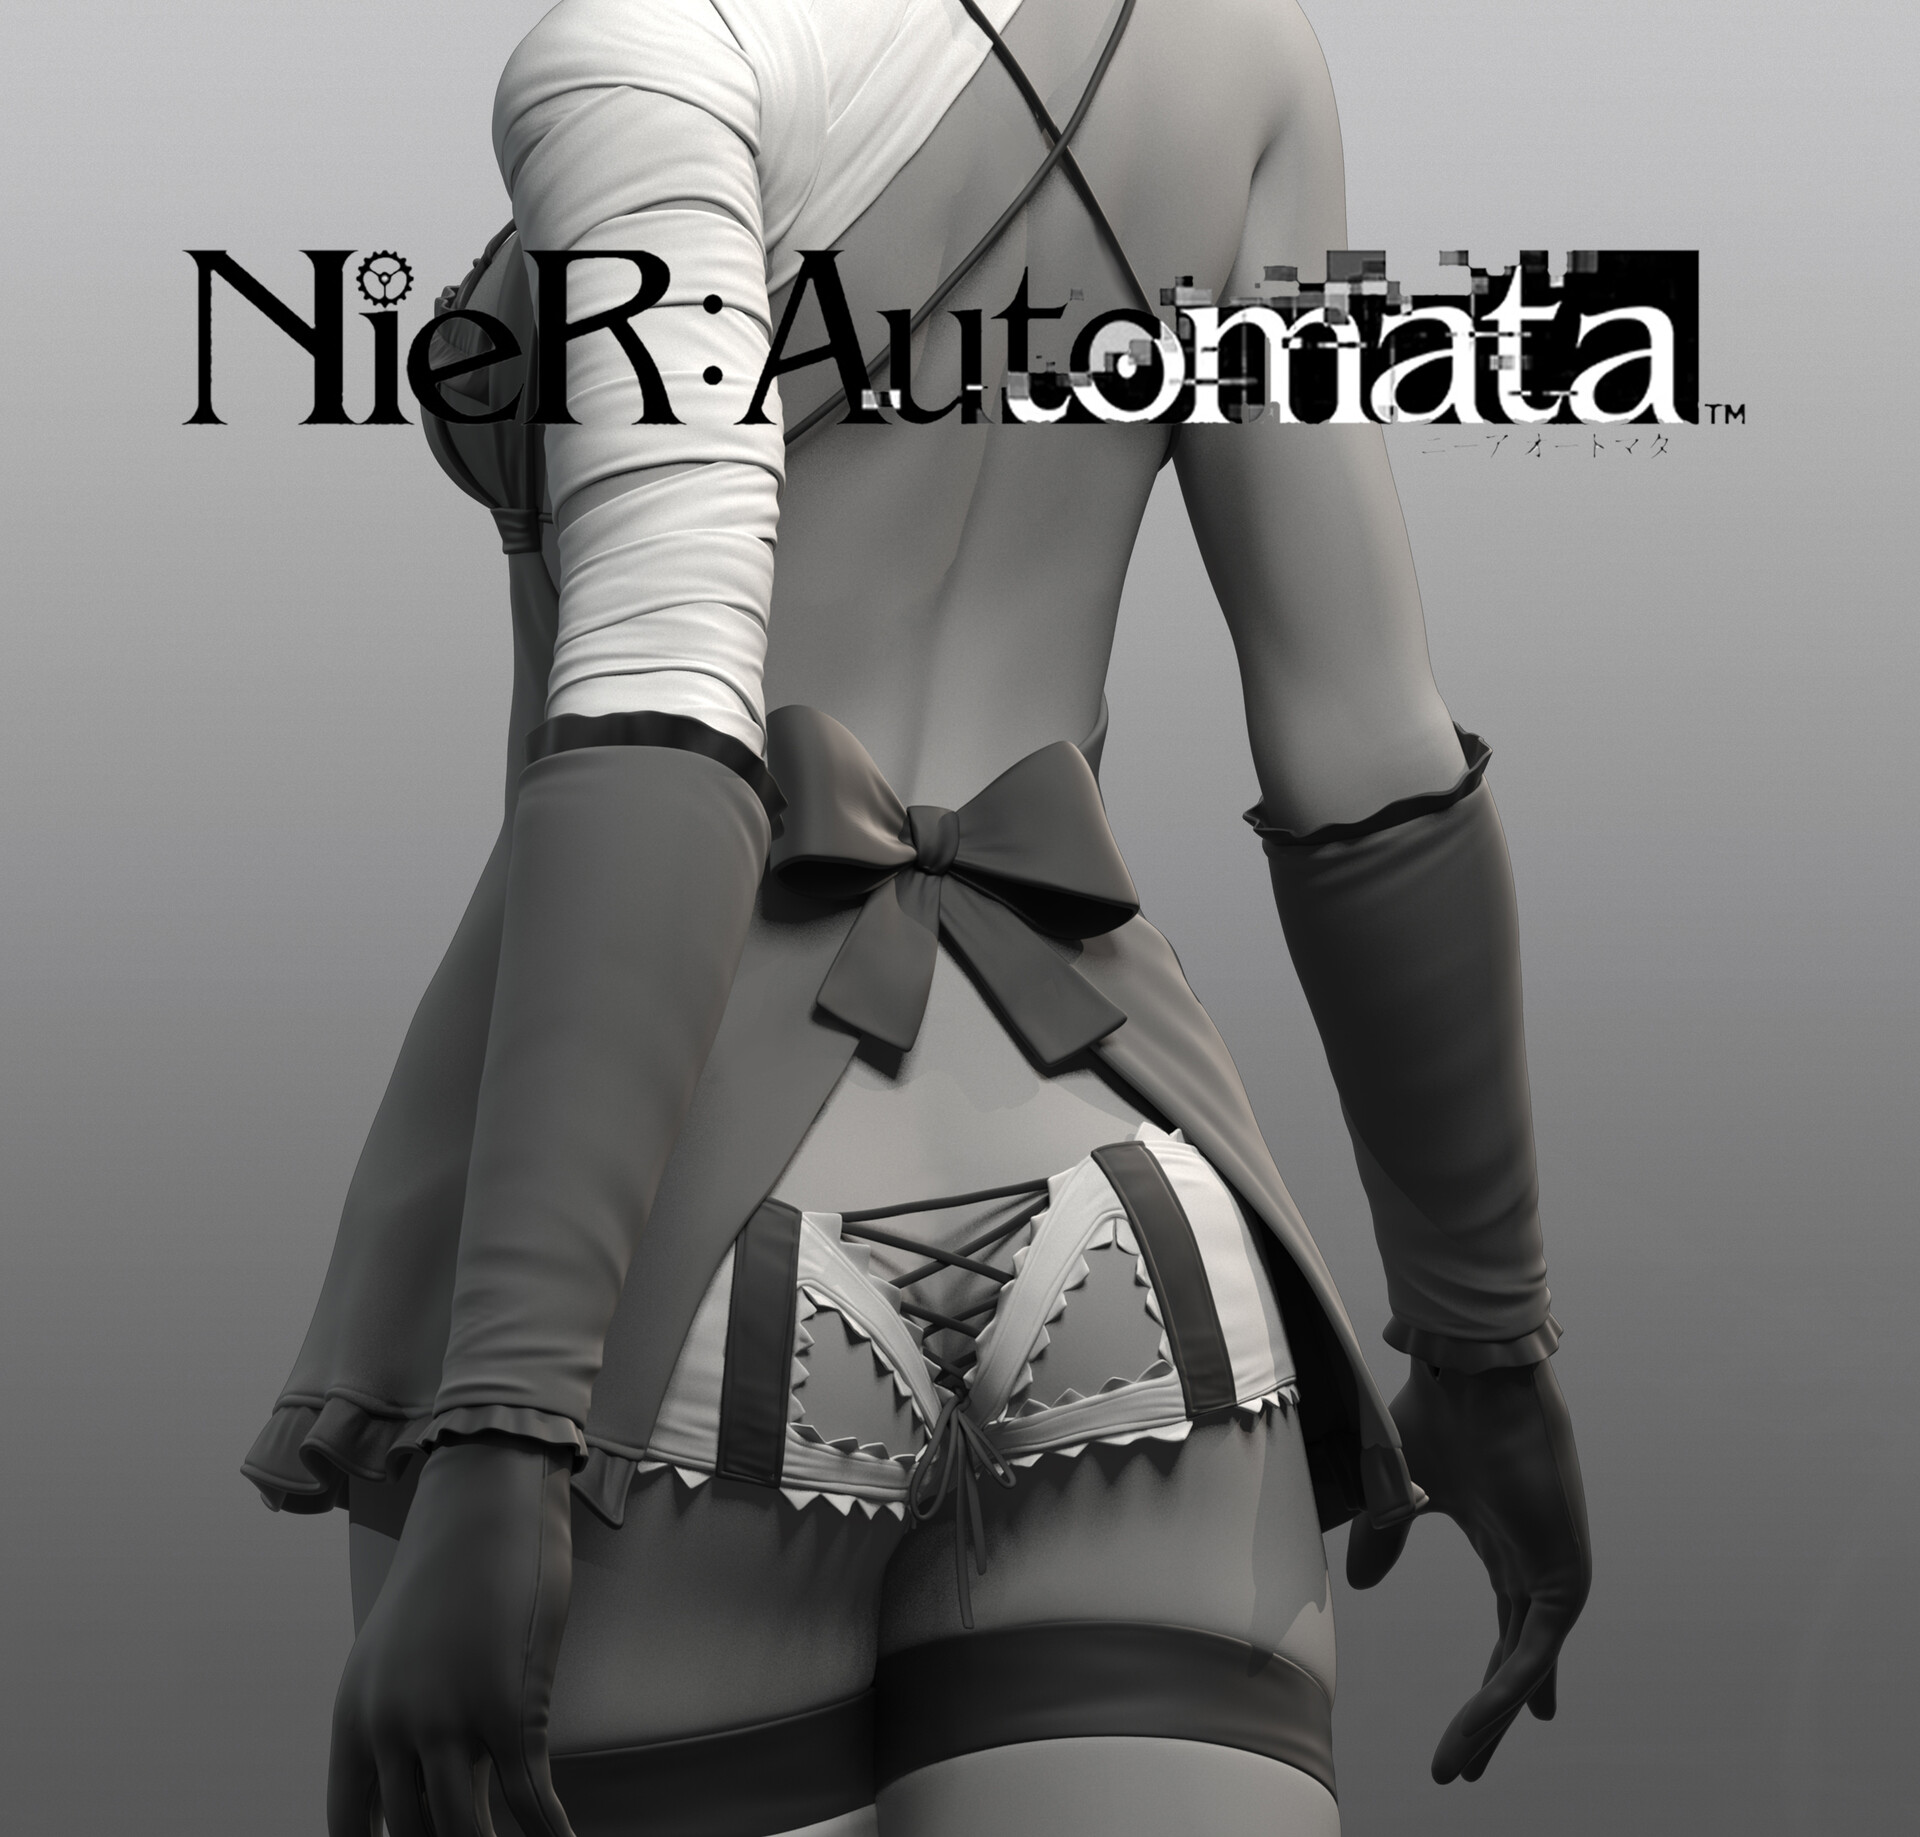 nier automata 2b revealing outfit